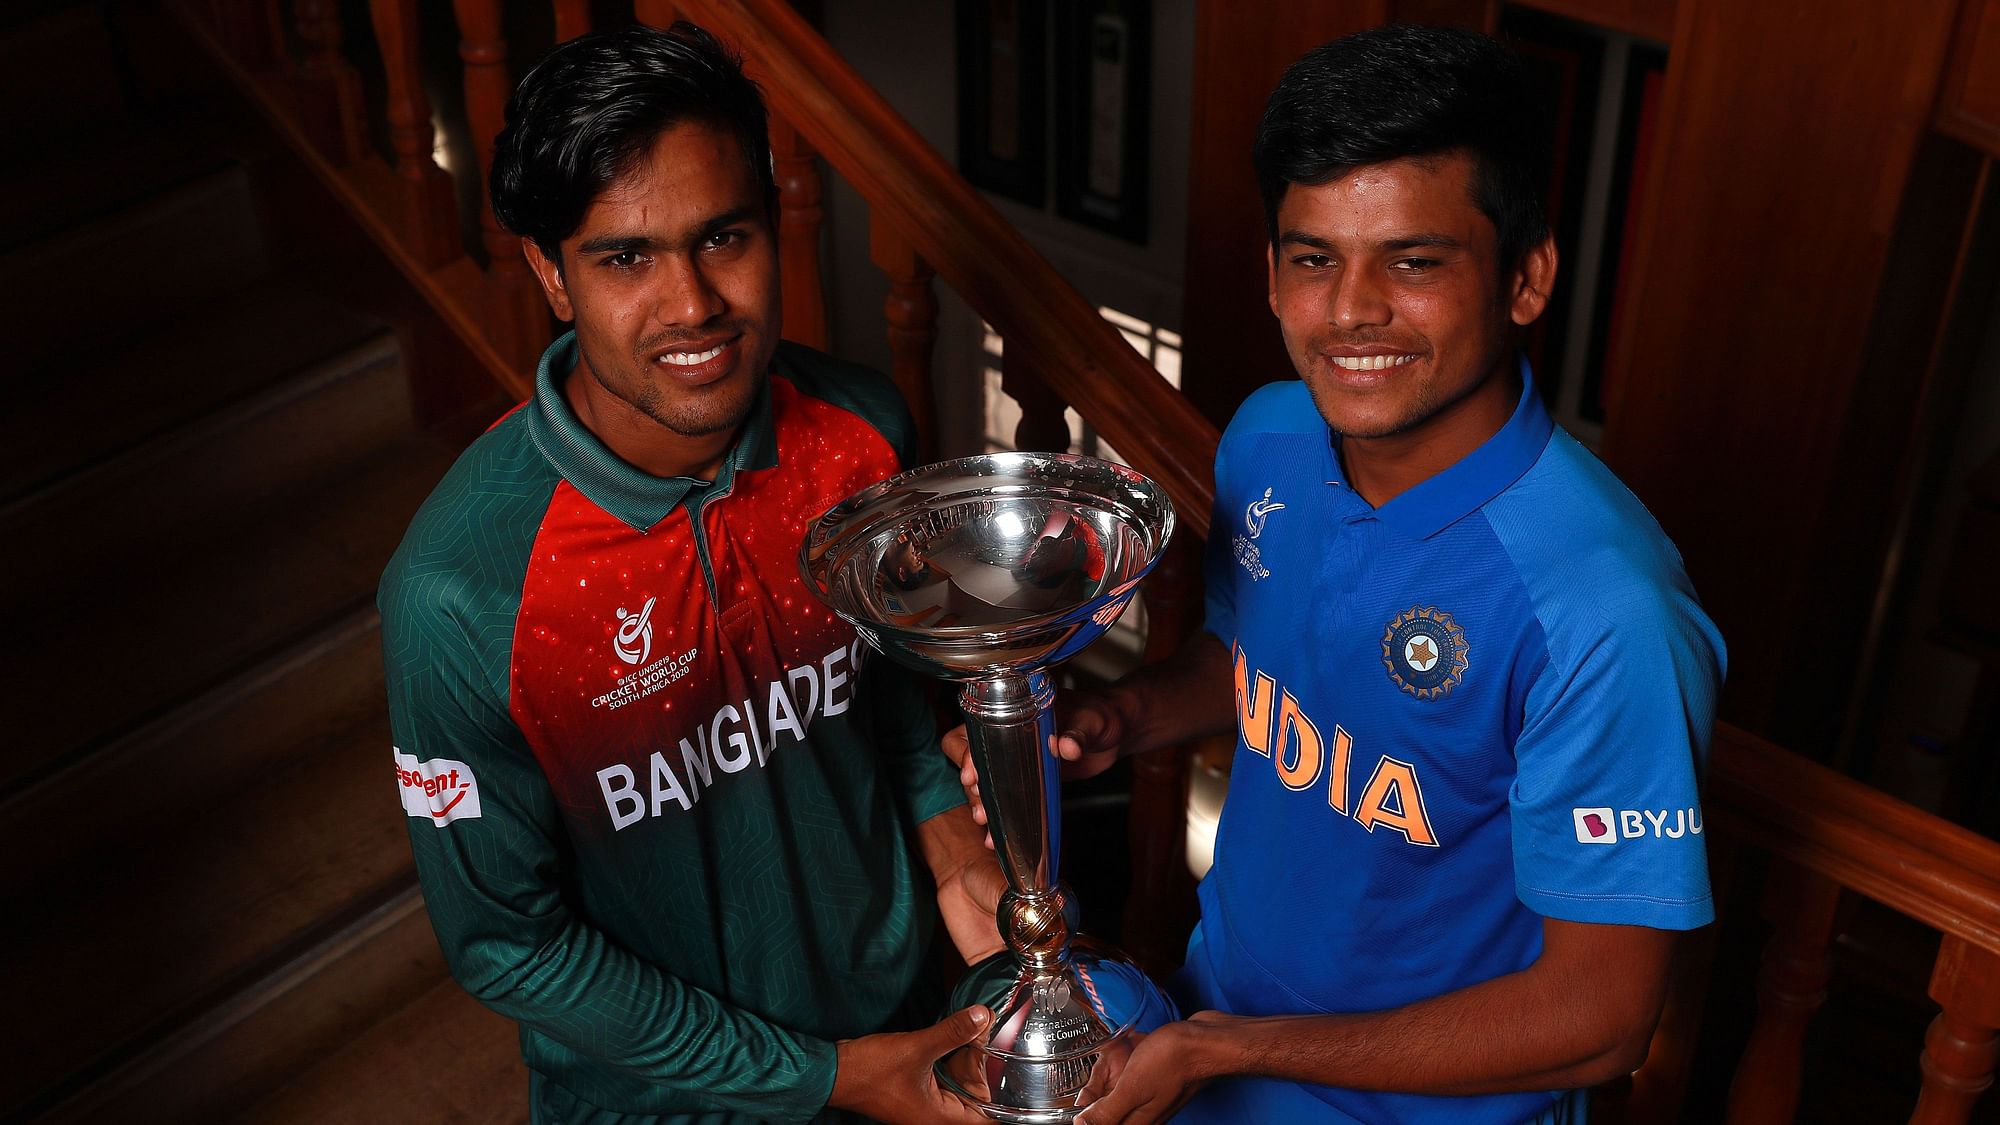 India defeated Pakistan by 10 wickets to enter their third consecutive ICC Under-19 World Cup final.